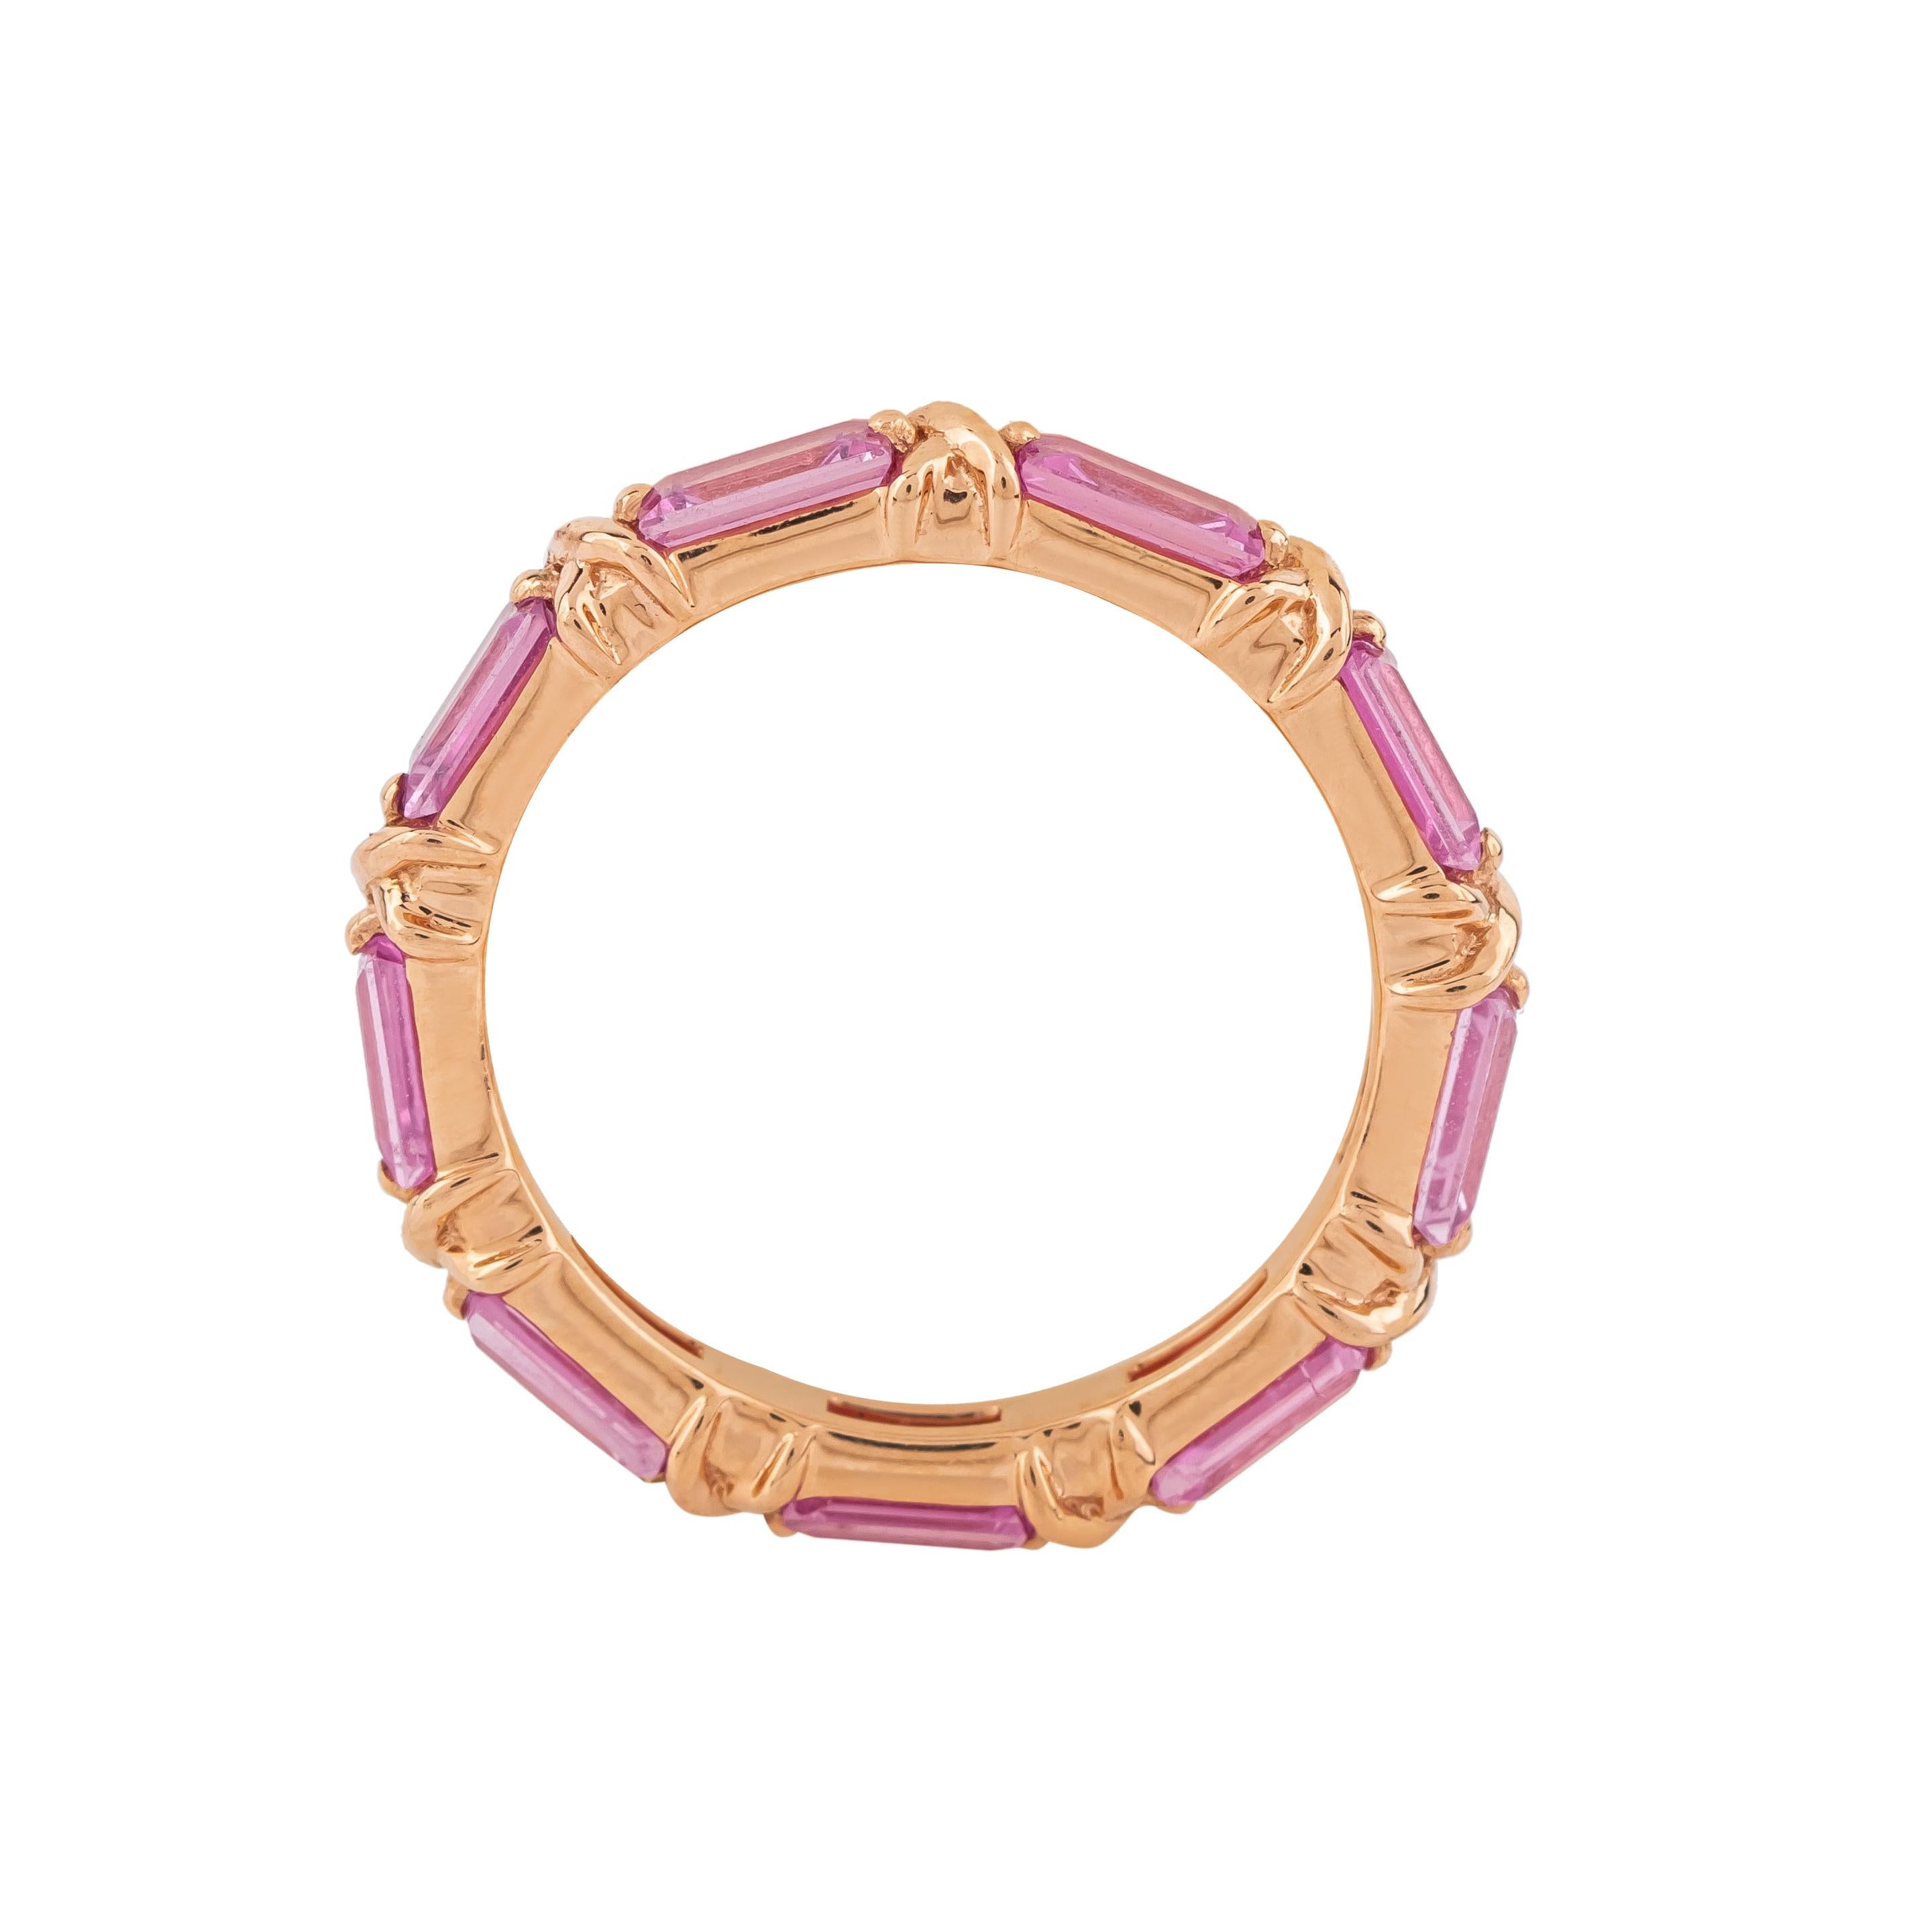 Immerse yourself in a world of timeless elegance with our 18 Karat Gold 3.05 Carat Pink Sapphire Infinity Ring – a symbol of everlasting beauty and grace. Each ring is meticulously crafted and curated to embody the essence of luxury and